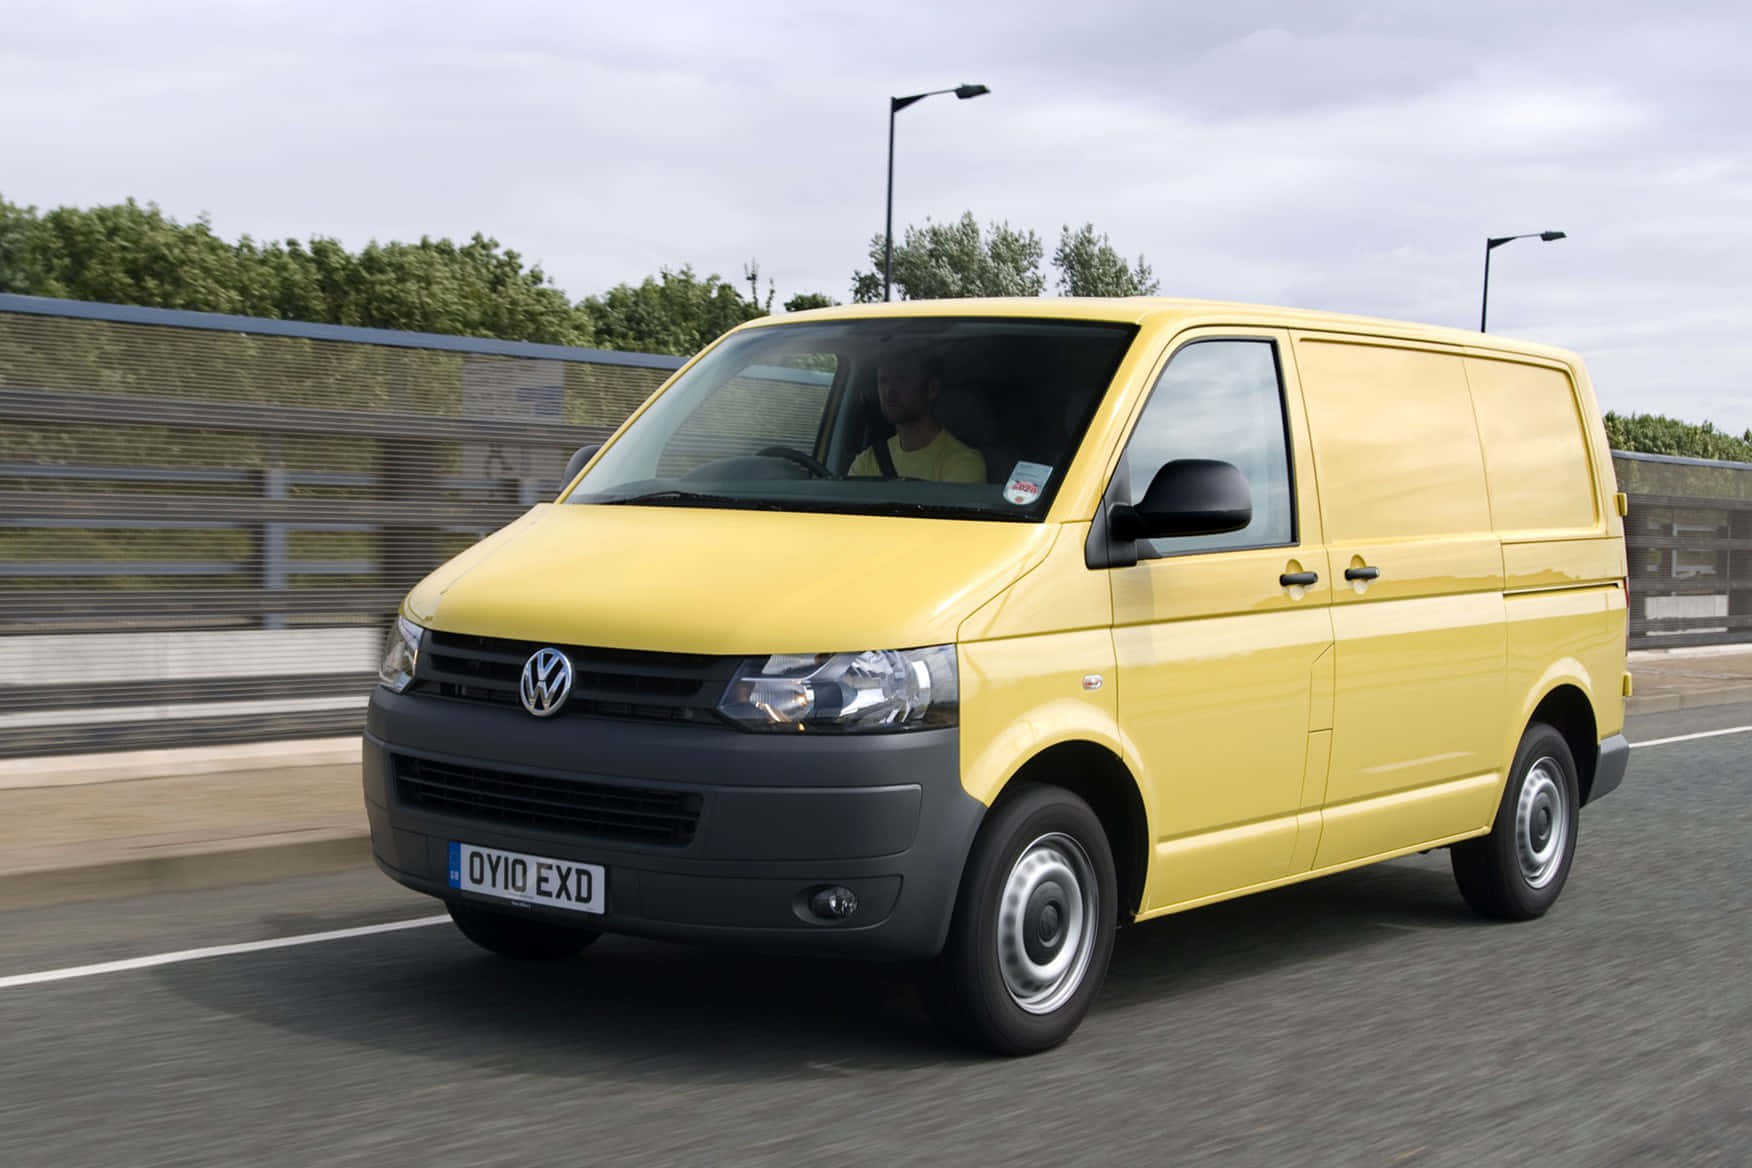 A Shiny New Volkswagen Transporter Parked On A Road Wallpaper